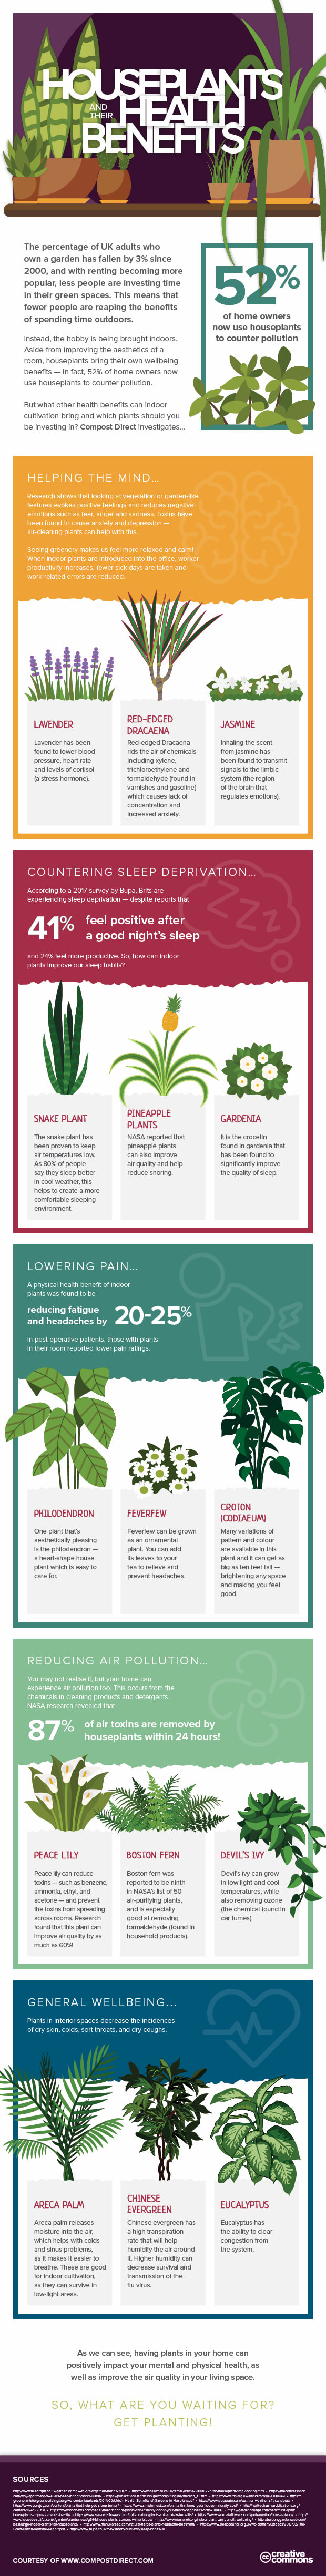 houseplants and their health benefits